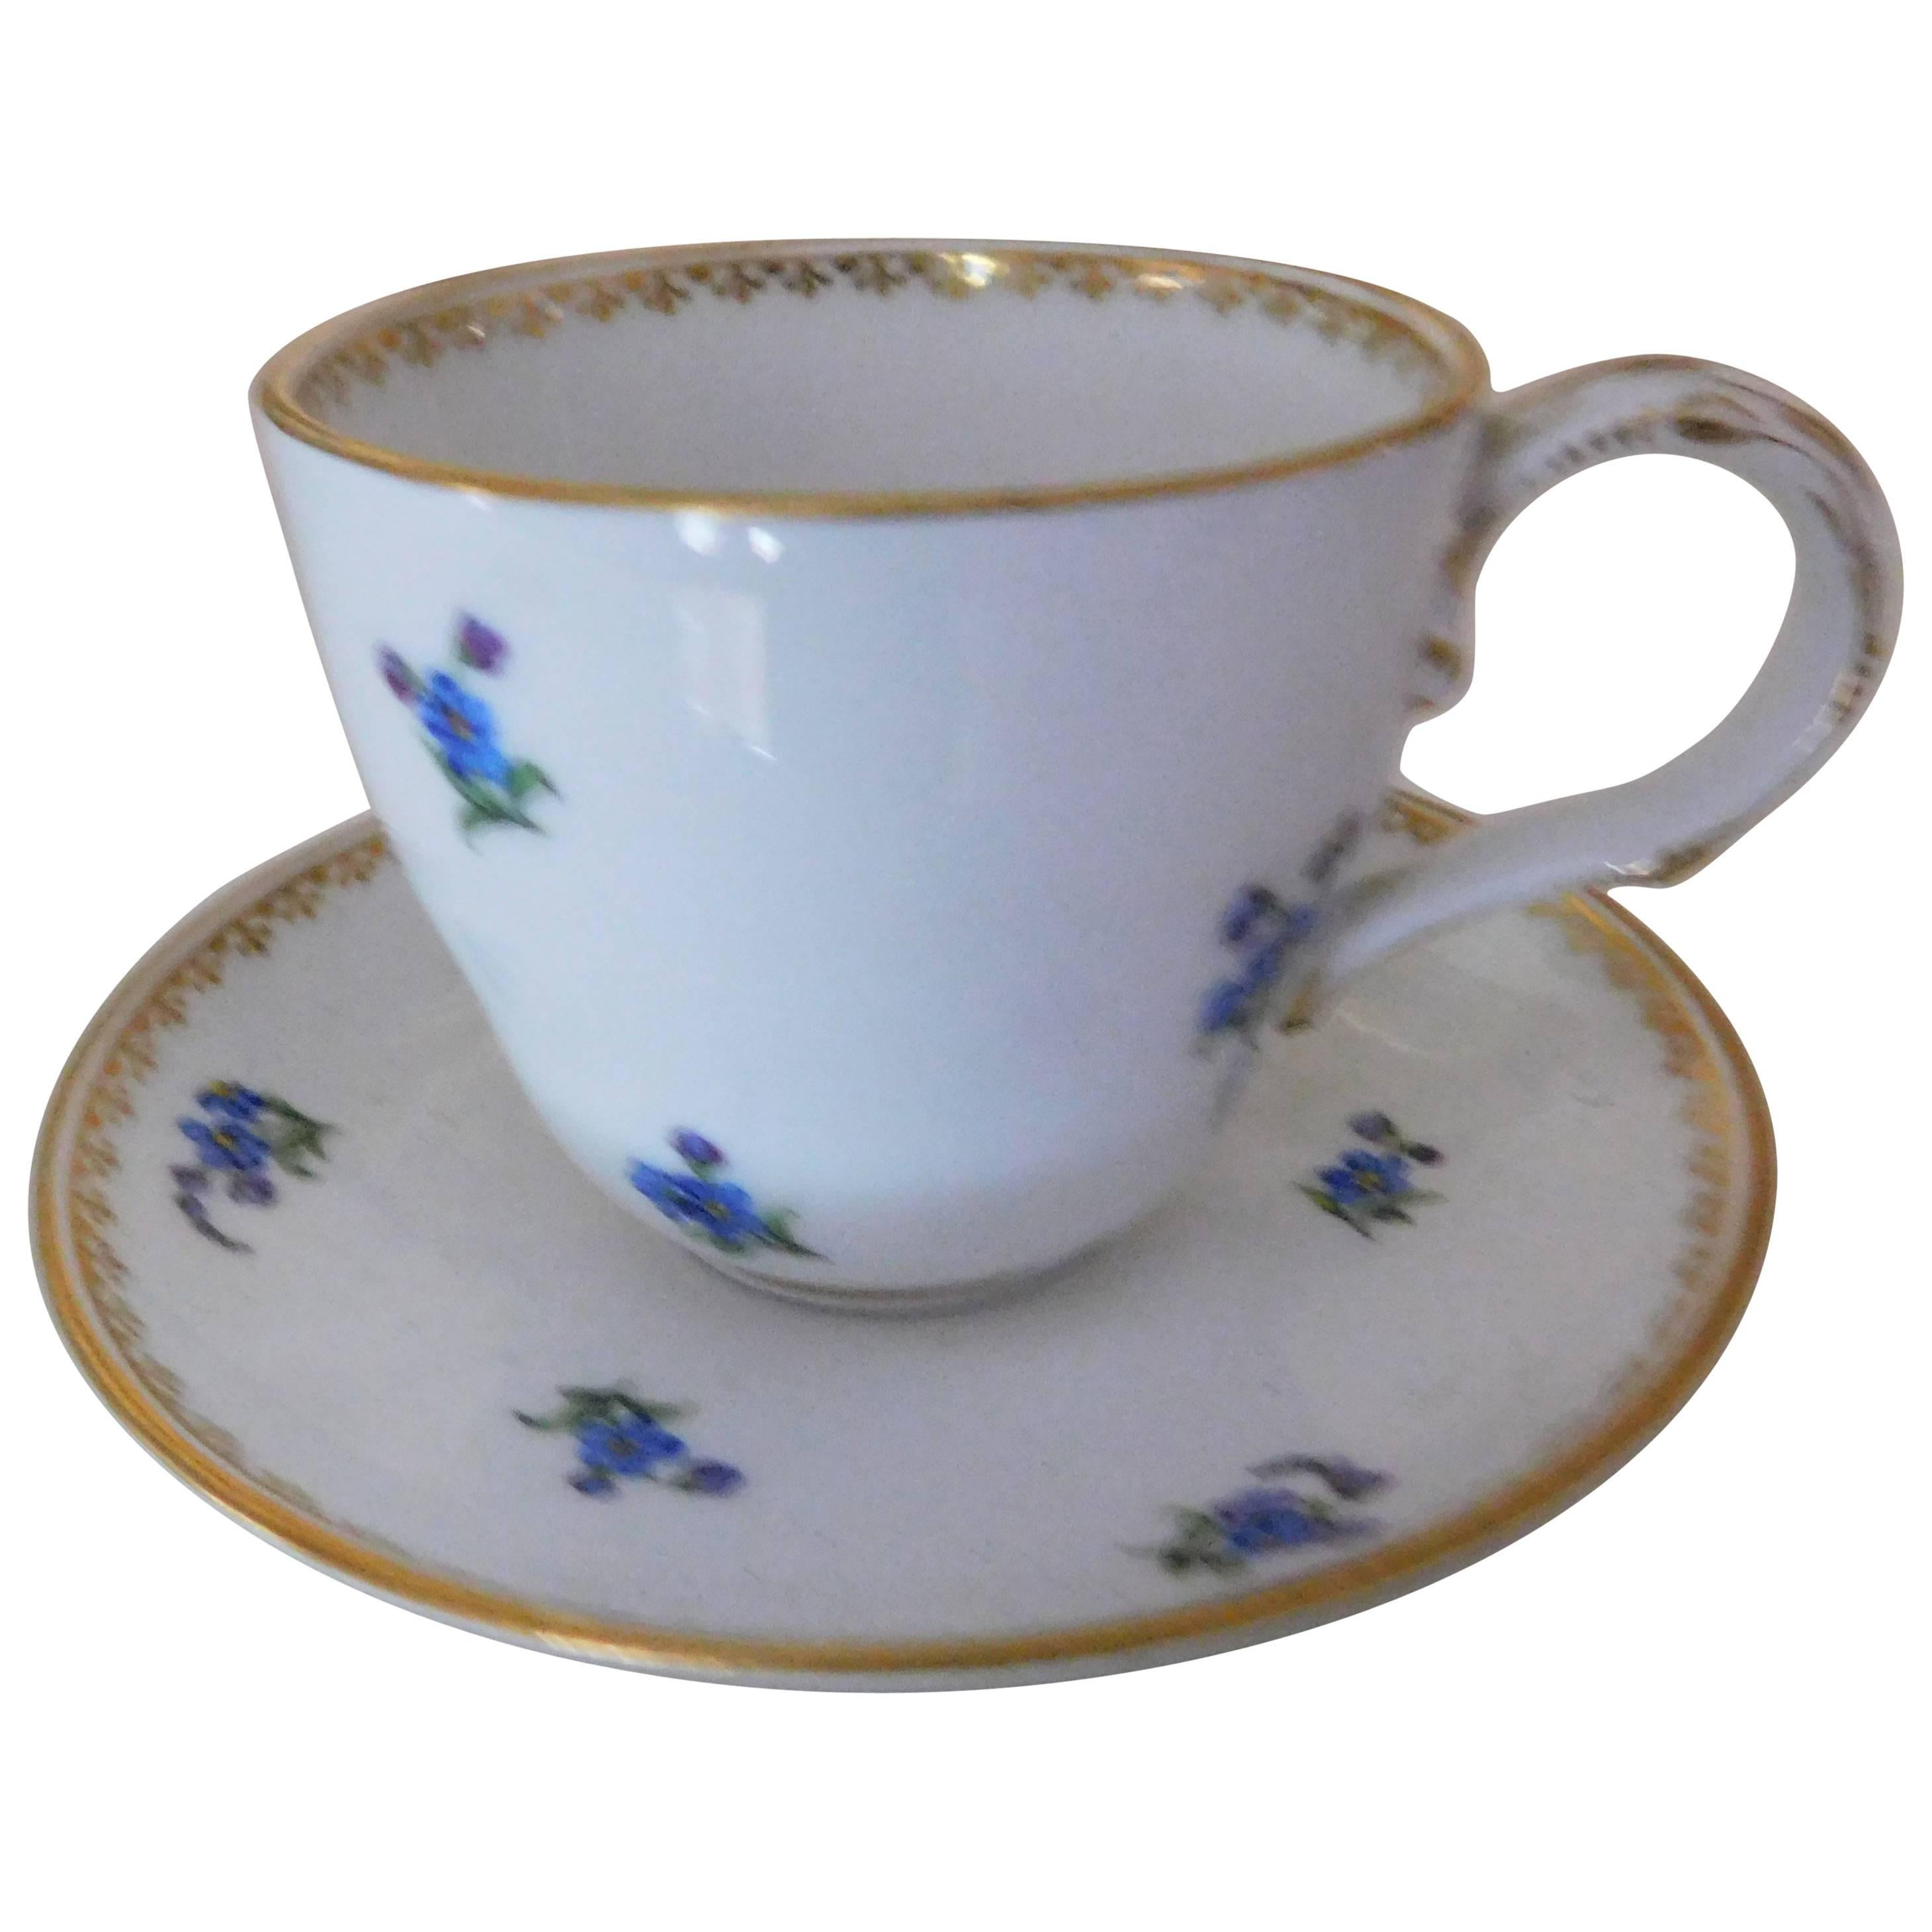 Early 19th Century Meissen Porcelain Blue Flower Demitasse Cup and Saucer